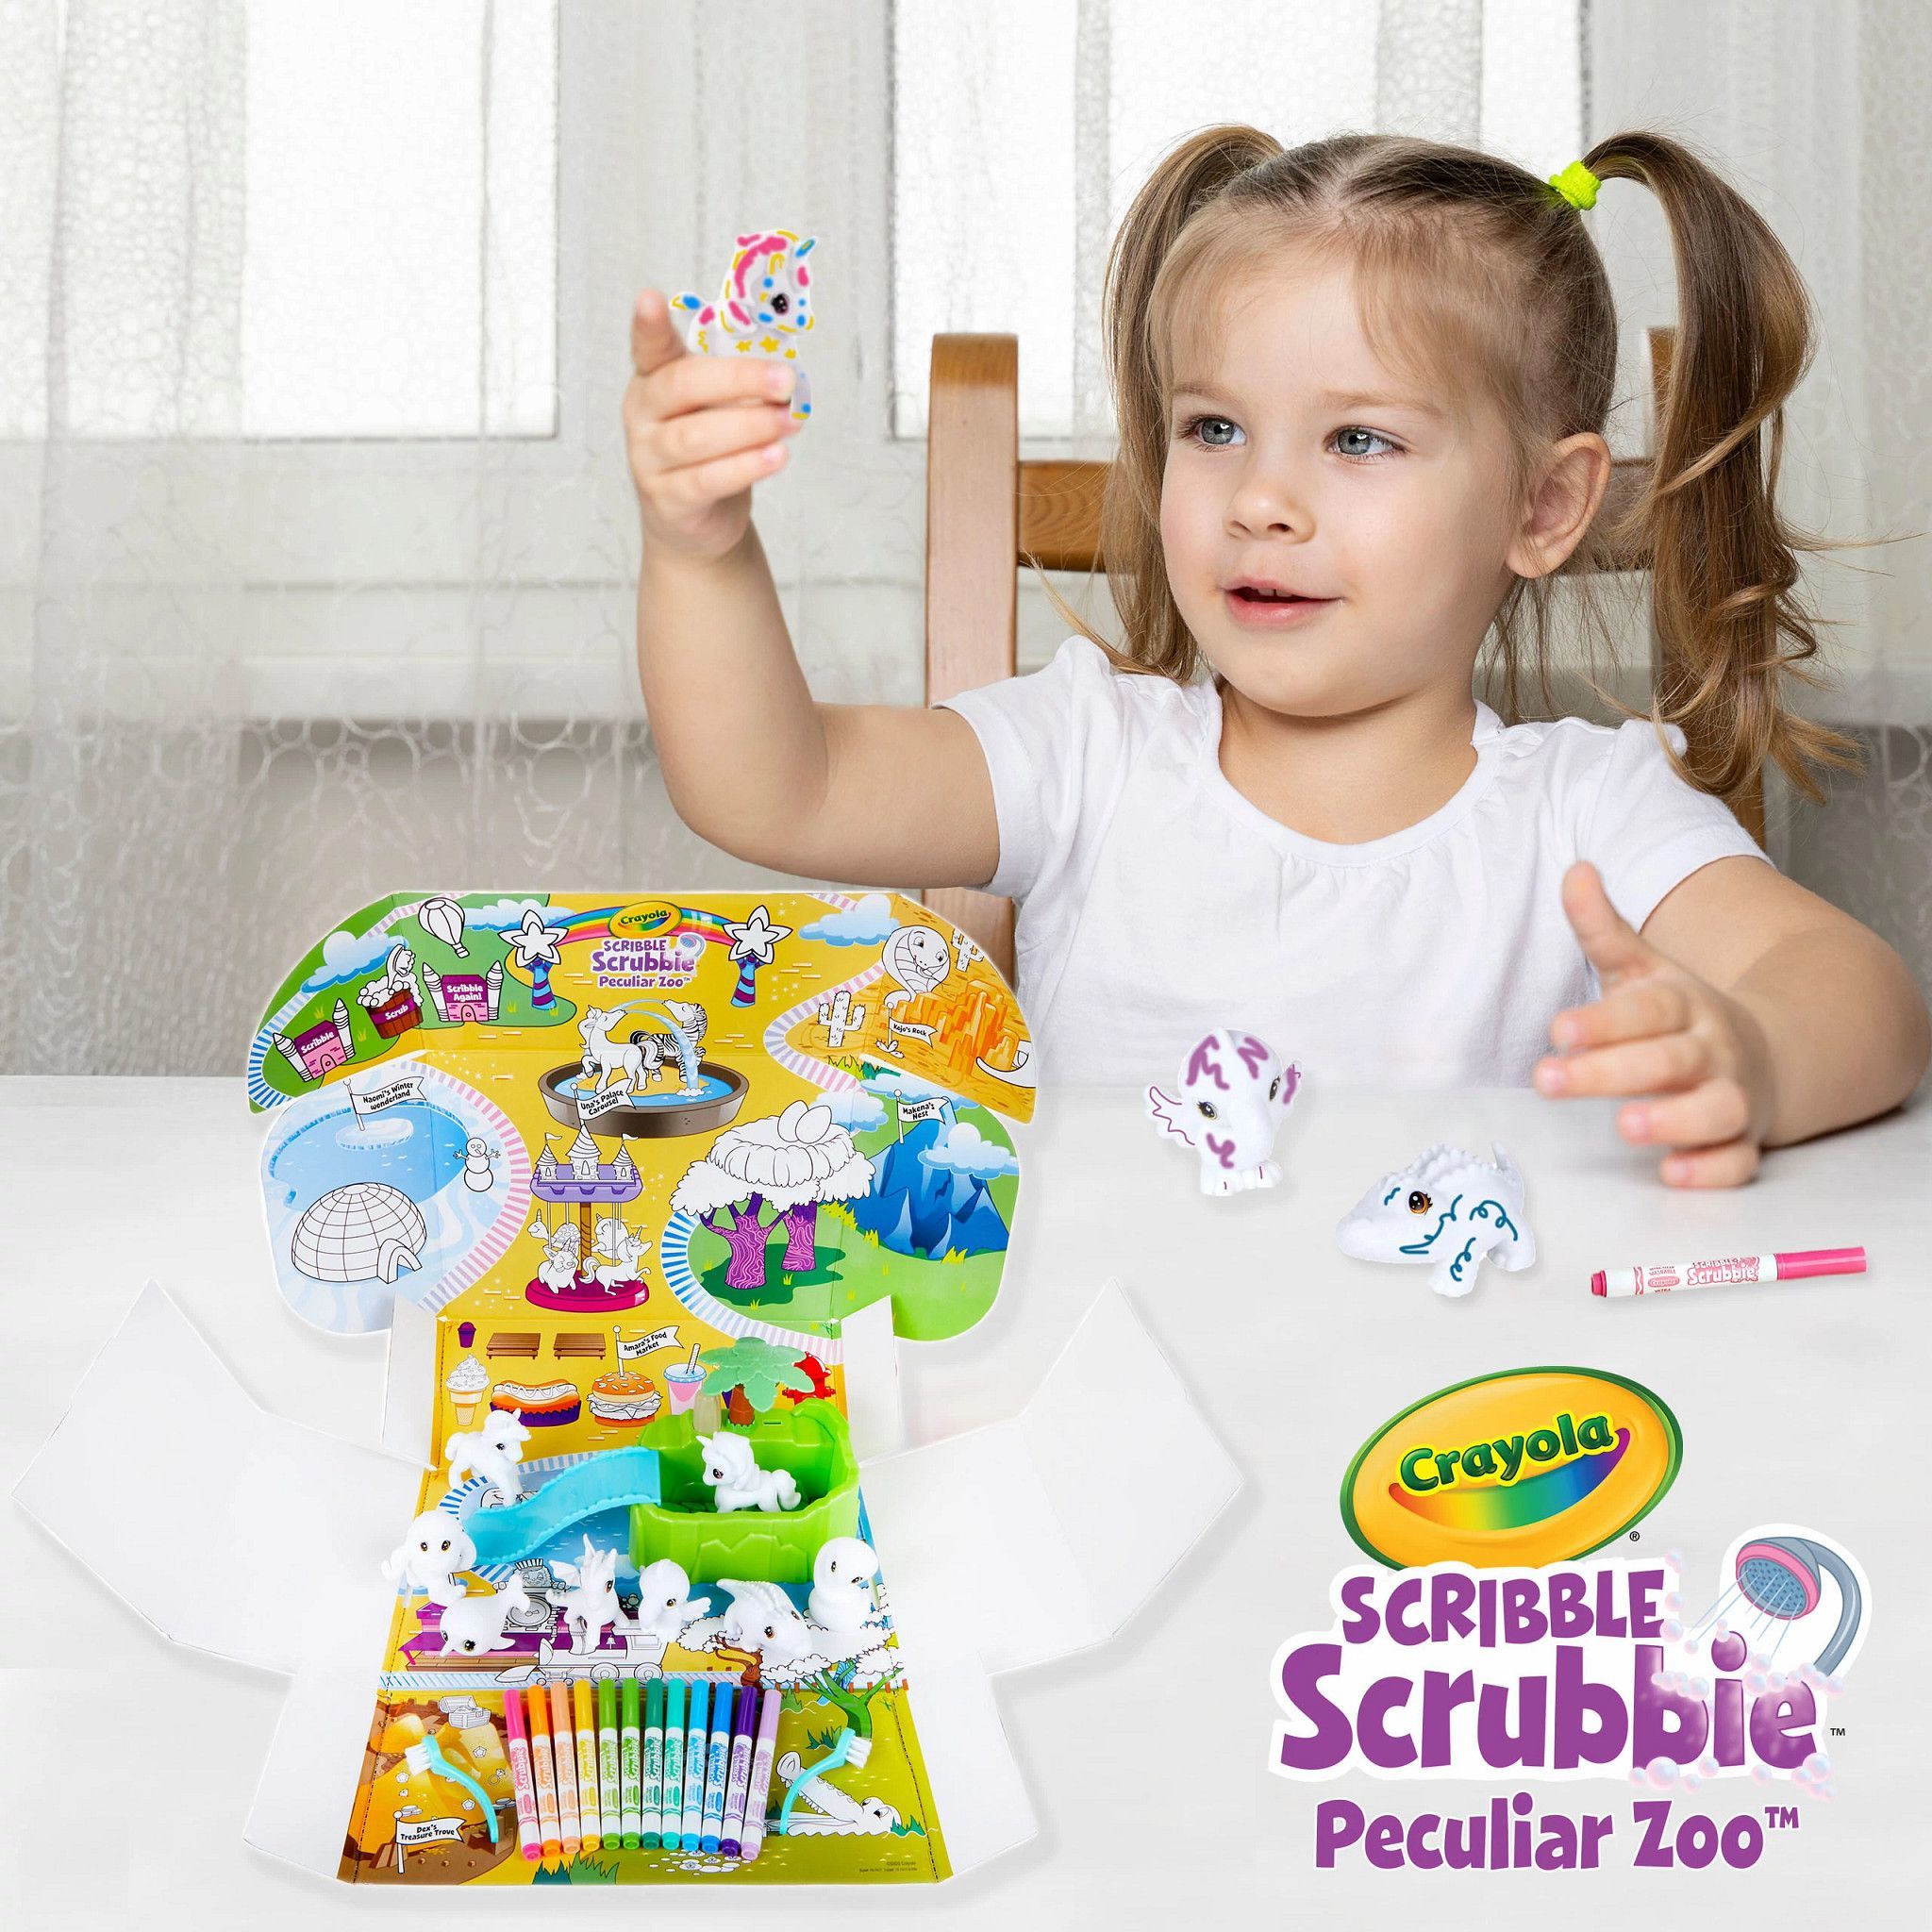 Crayola Scribble Scrubbie Peculiar Zoo Mess Free Playset, Creative Toys, Gift for Beginner Child - image 9 of 9